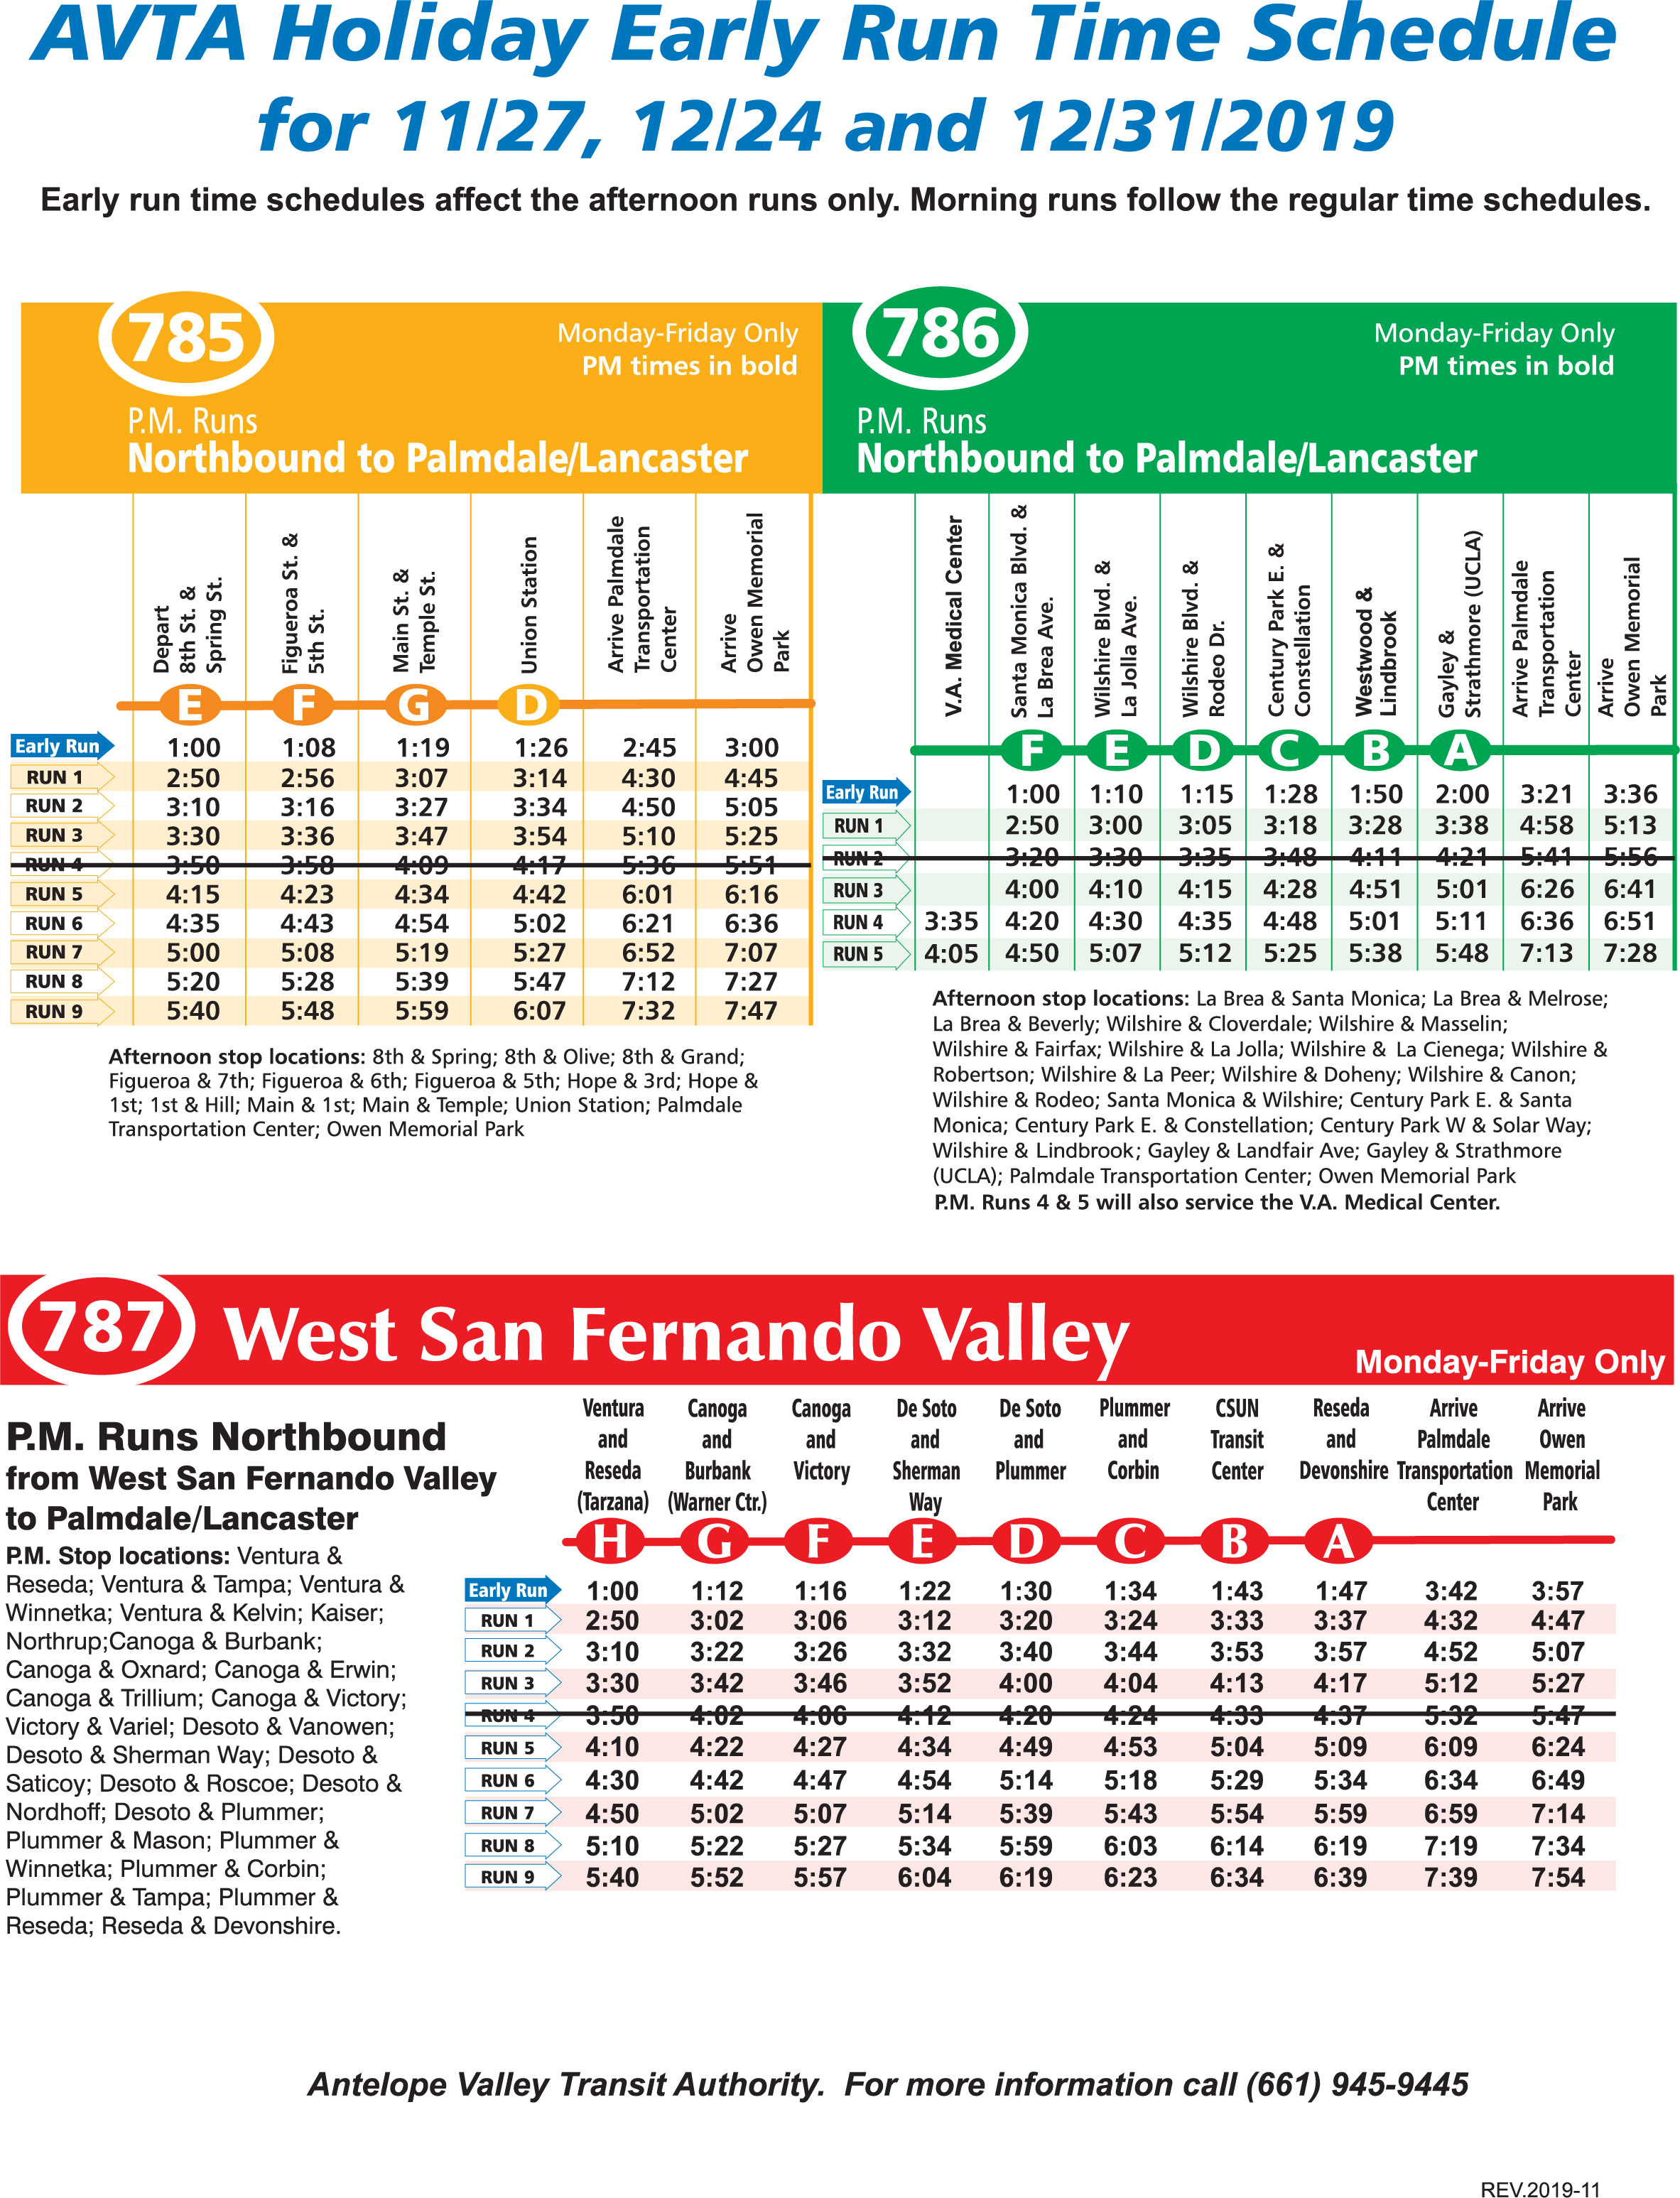 AVTA Holiday Early Run Time Schedule